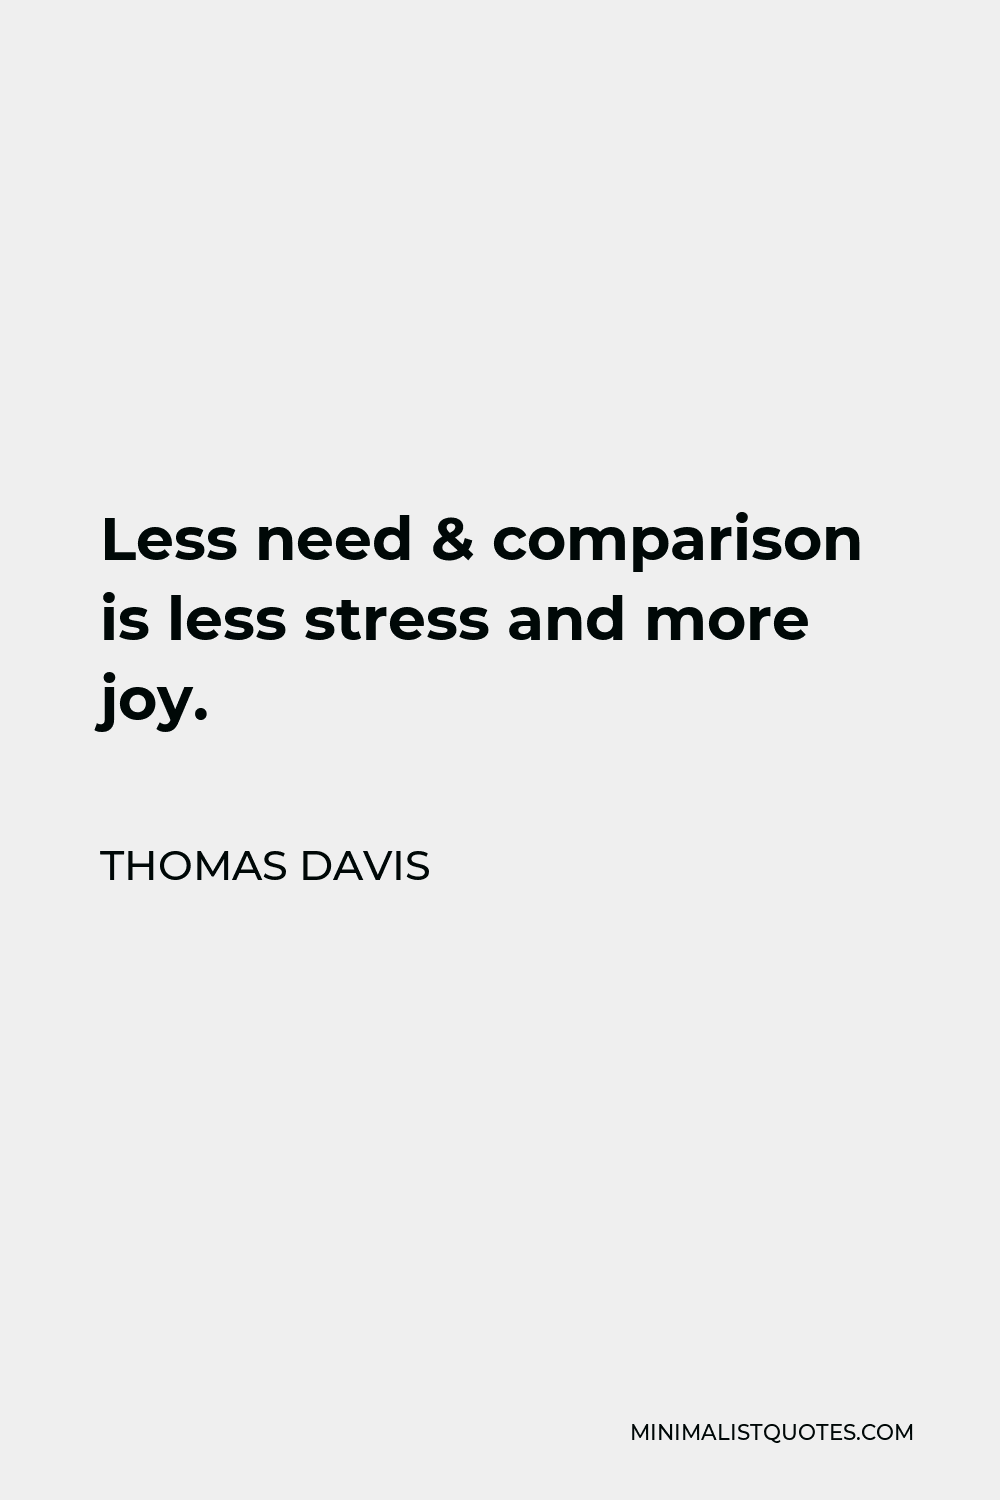 Thomas Davis Quote - Less need & comparison is less stress and more joy.  